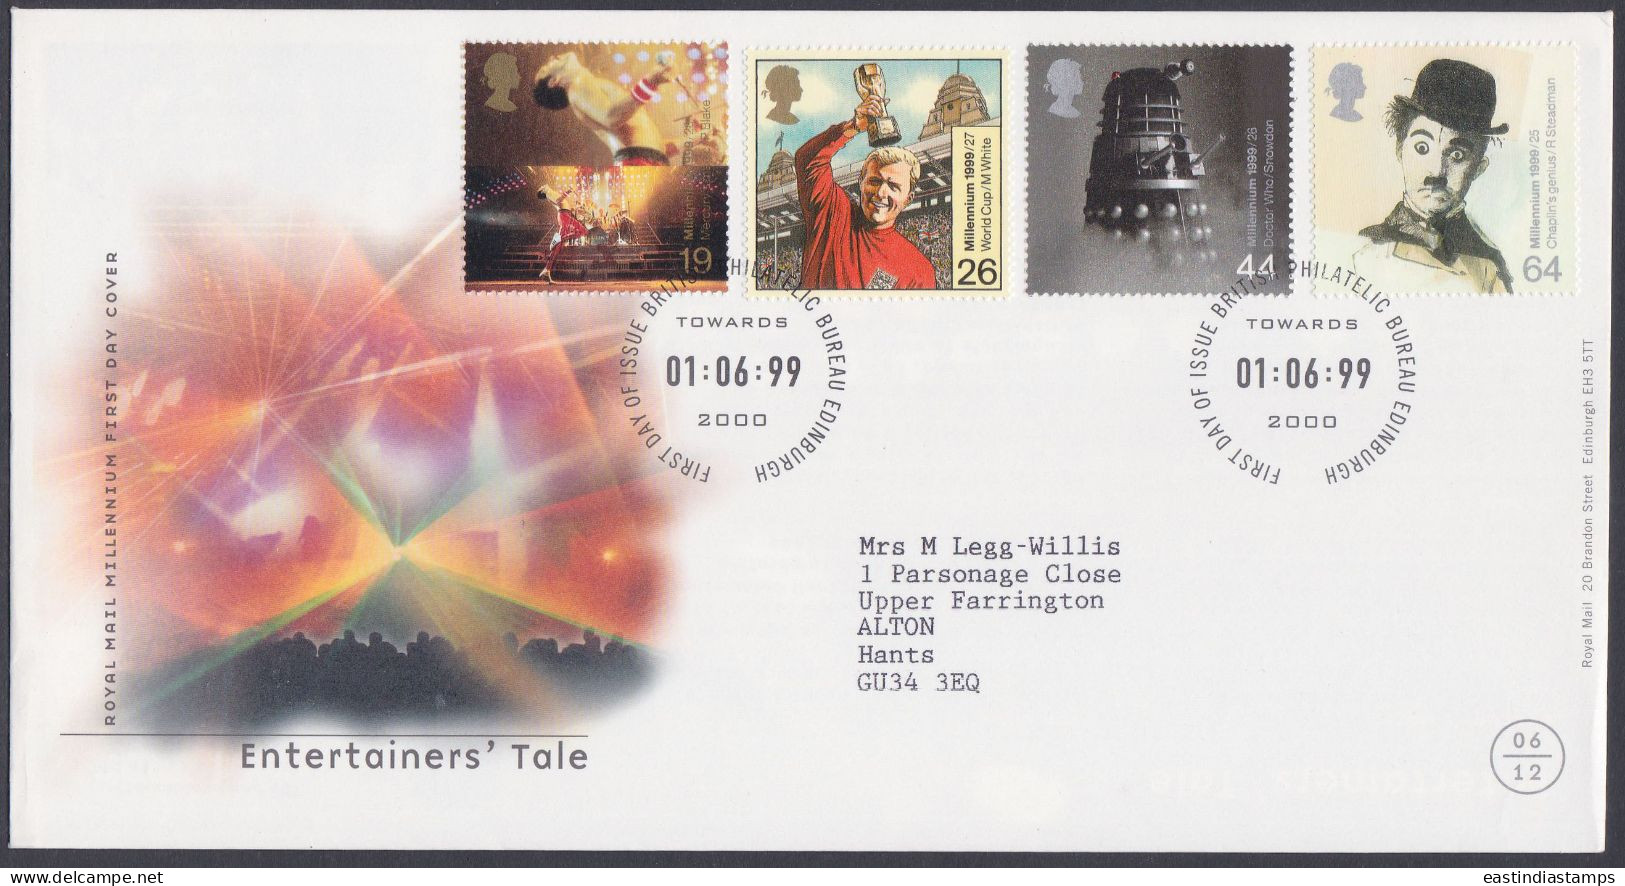 GB Great Britain 1999 FDC Entertainers' Tale, Charlie Chaplin, Film, Football, Music Pictorial Postmark, First Day Cover - Lettres & Documents